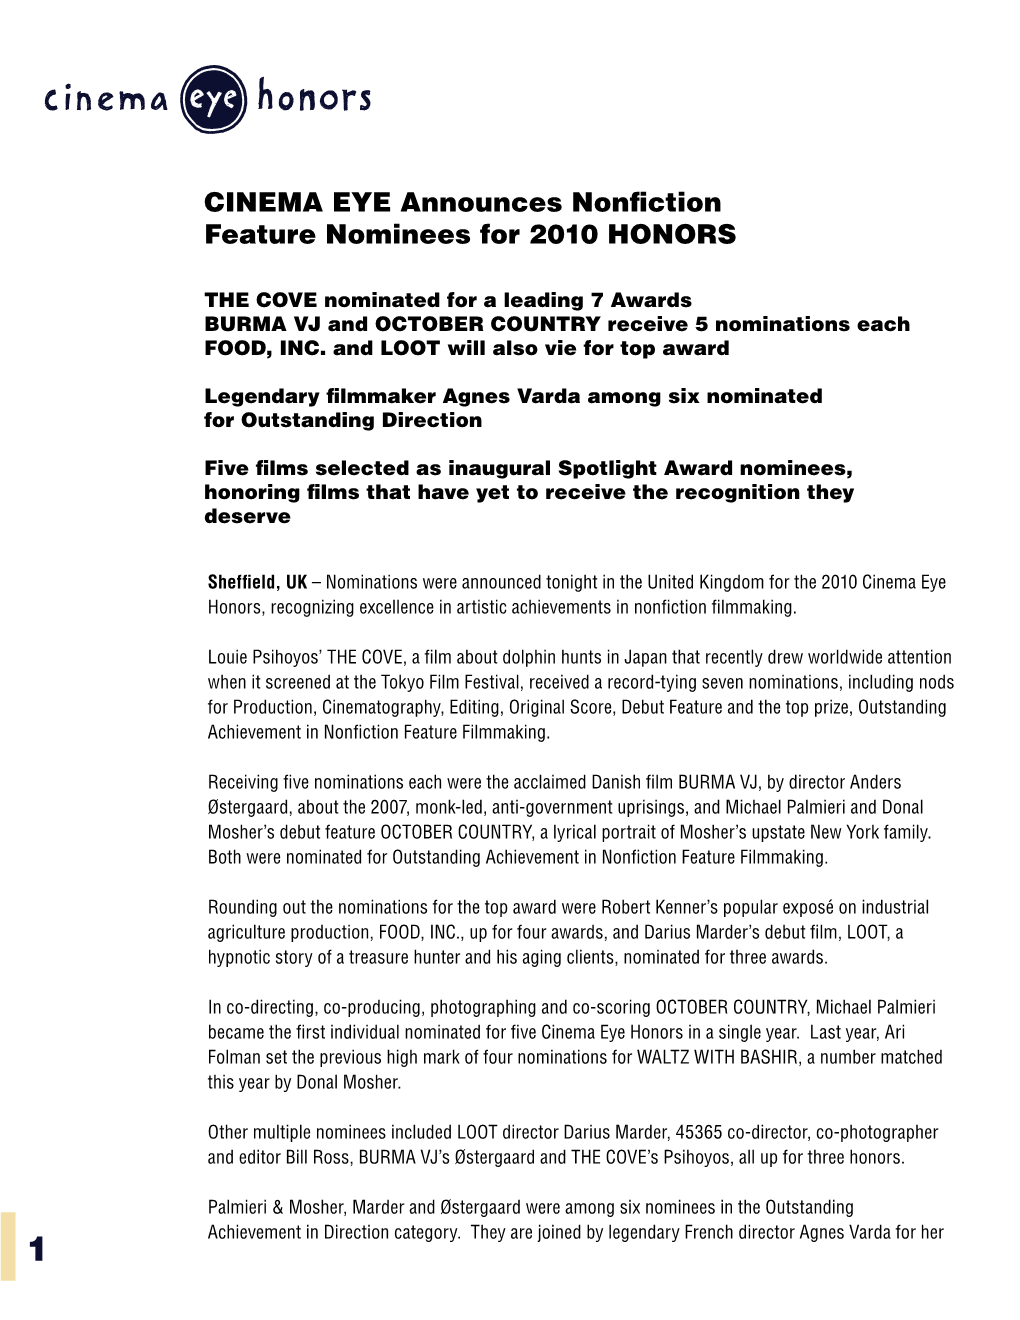 CINEMA EYE Announces Nonfiction Feature Nominees for 2010 HONORS